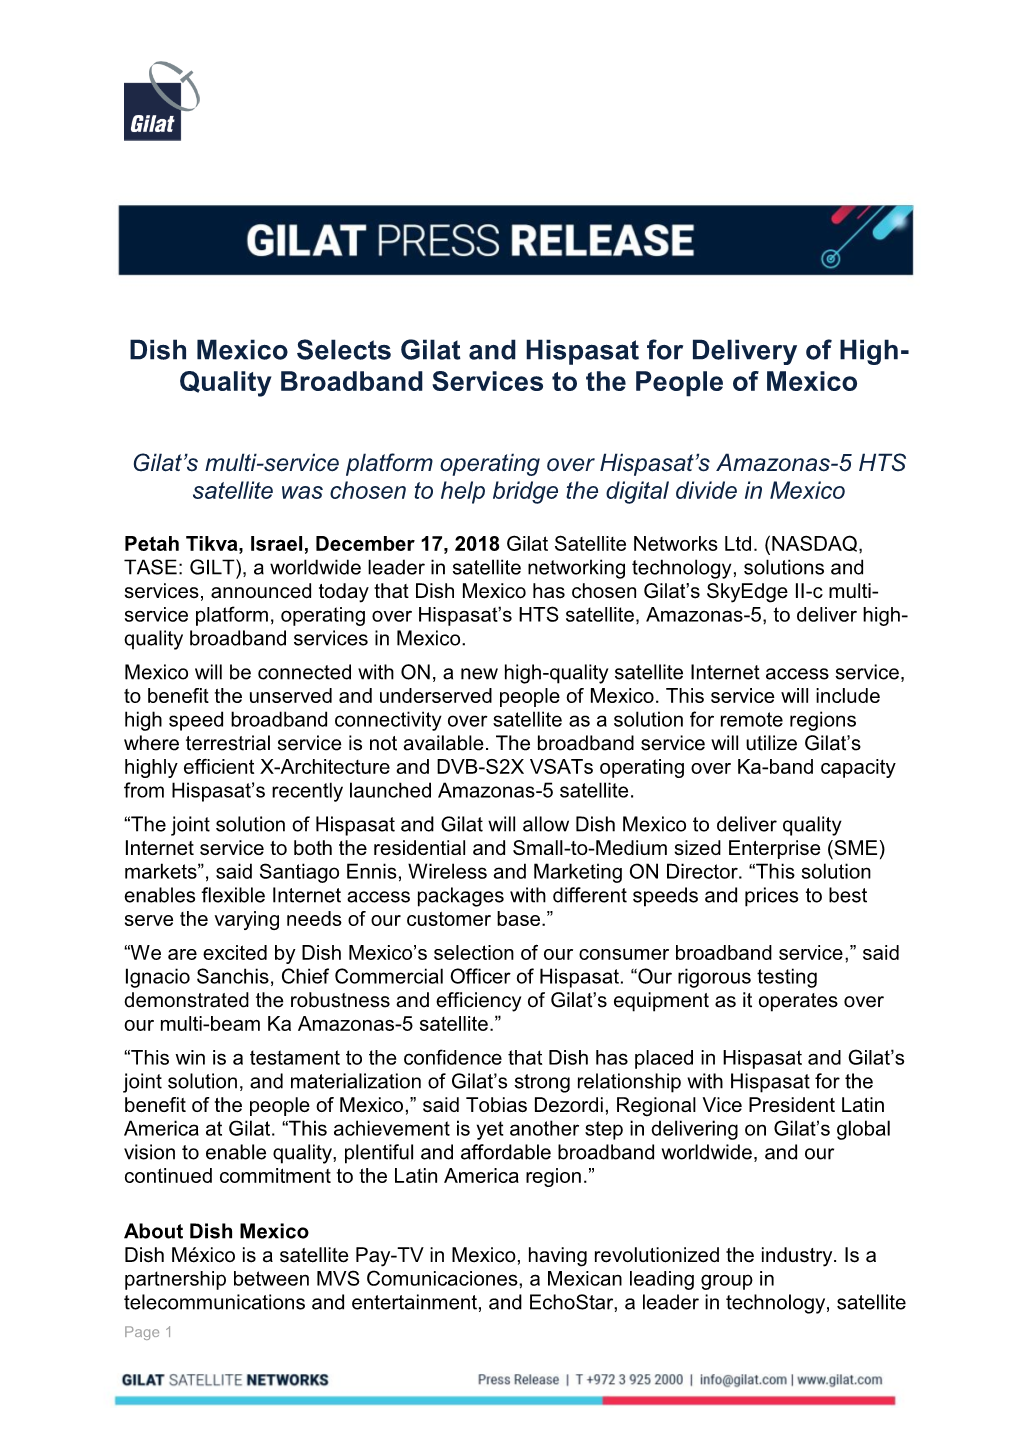 Dish Mexico Selects Gilat and Hispasat for Delivery of High- Quality Broadband Services to the People of Mexico